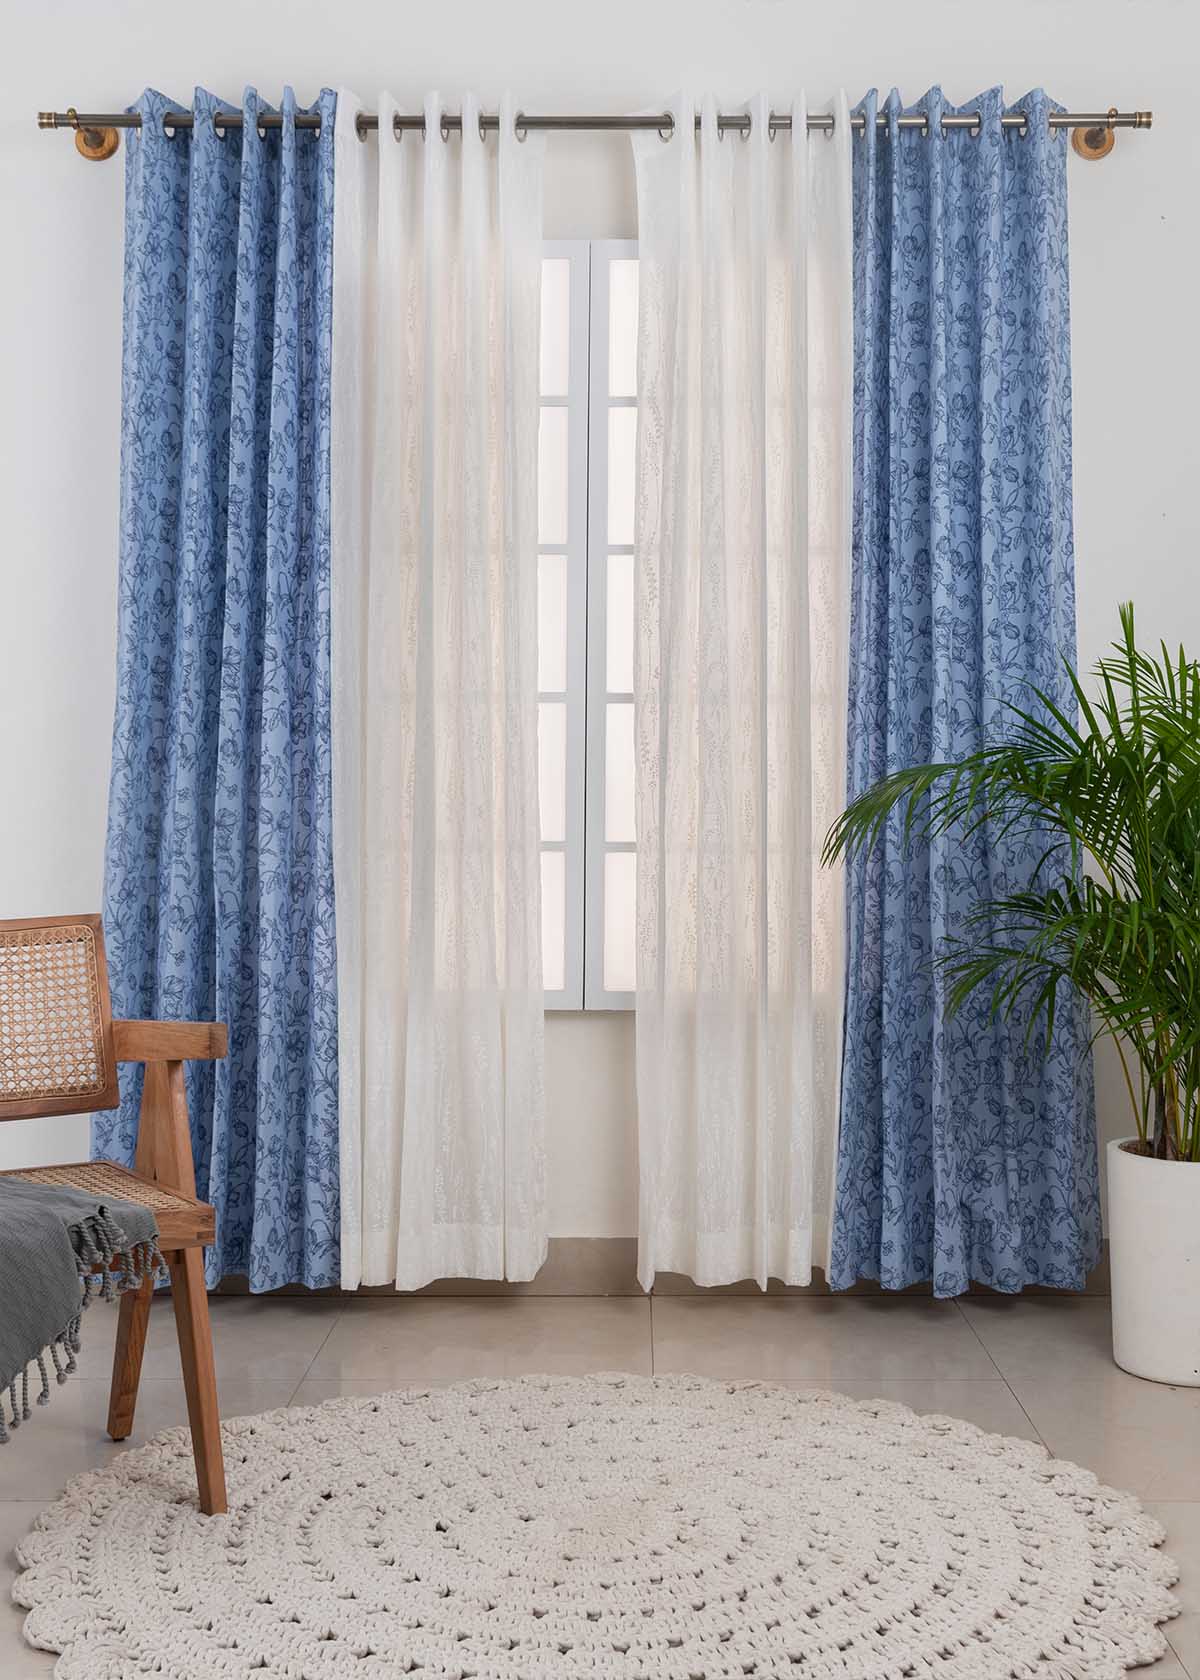 French Farmhouse In Blues, Grass Fields In White Set of 4 Combo Cotton Curtain - Blue And White